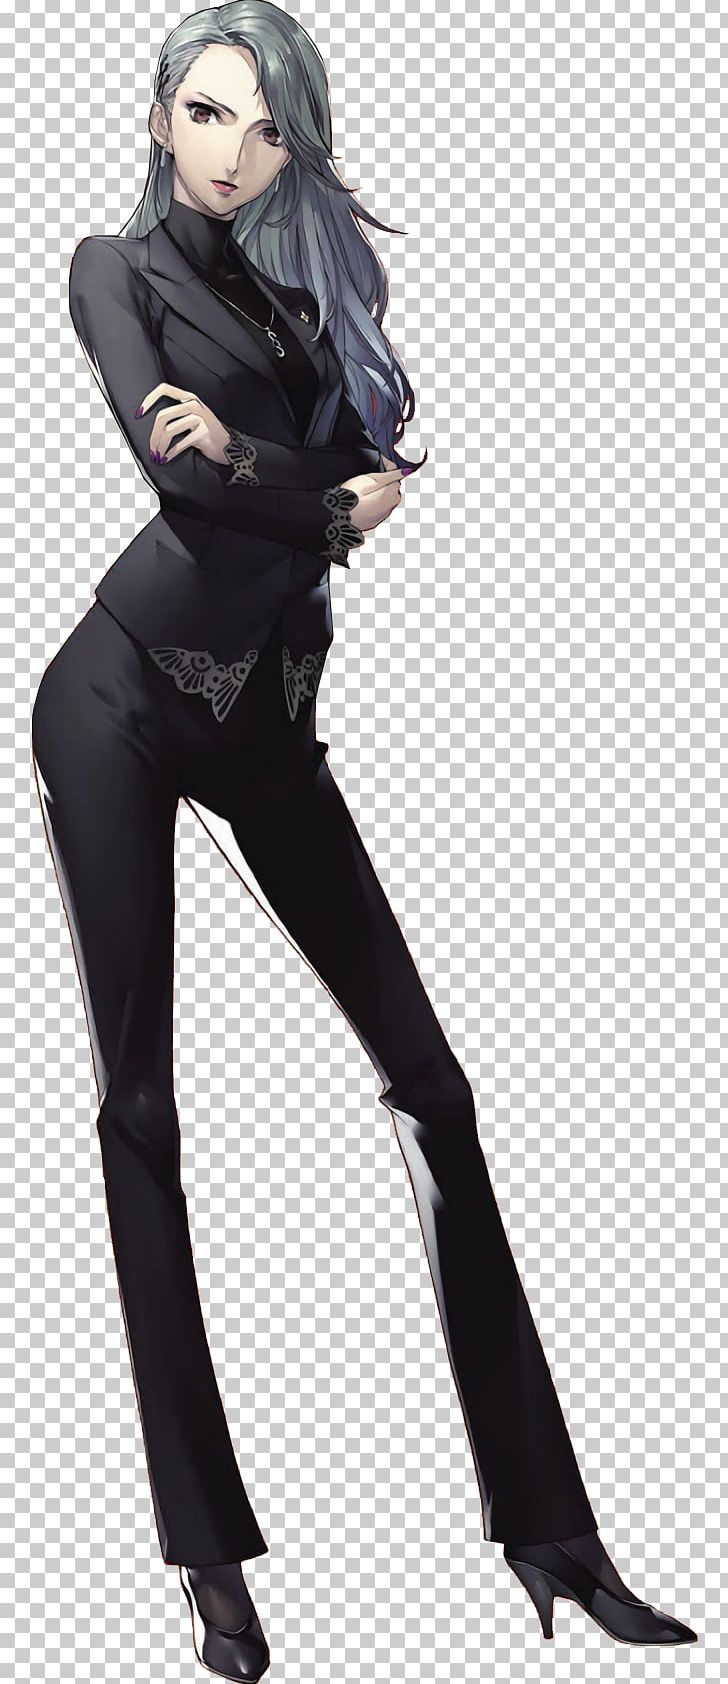 Persona 5: Dancing Star Night Shin Megami Tensei: Persona 3 Shin Megami Tensei: Persona 4 Persona: Trinity Soul PNG, Clipart, Art, Character, Cosplay, Costume, Fashion Model Free PNG Download